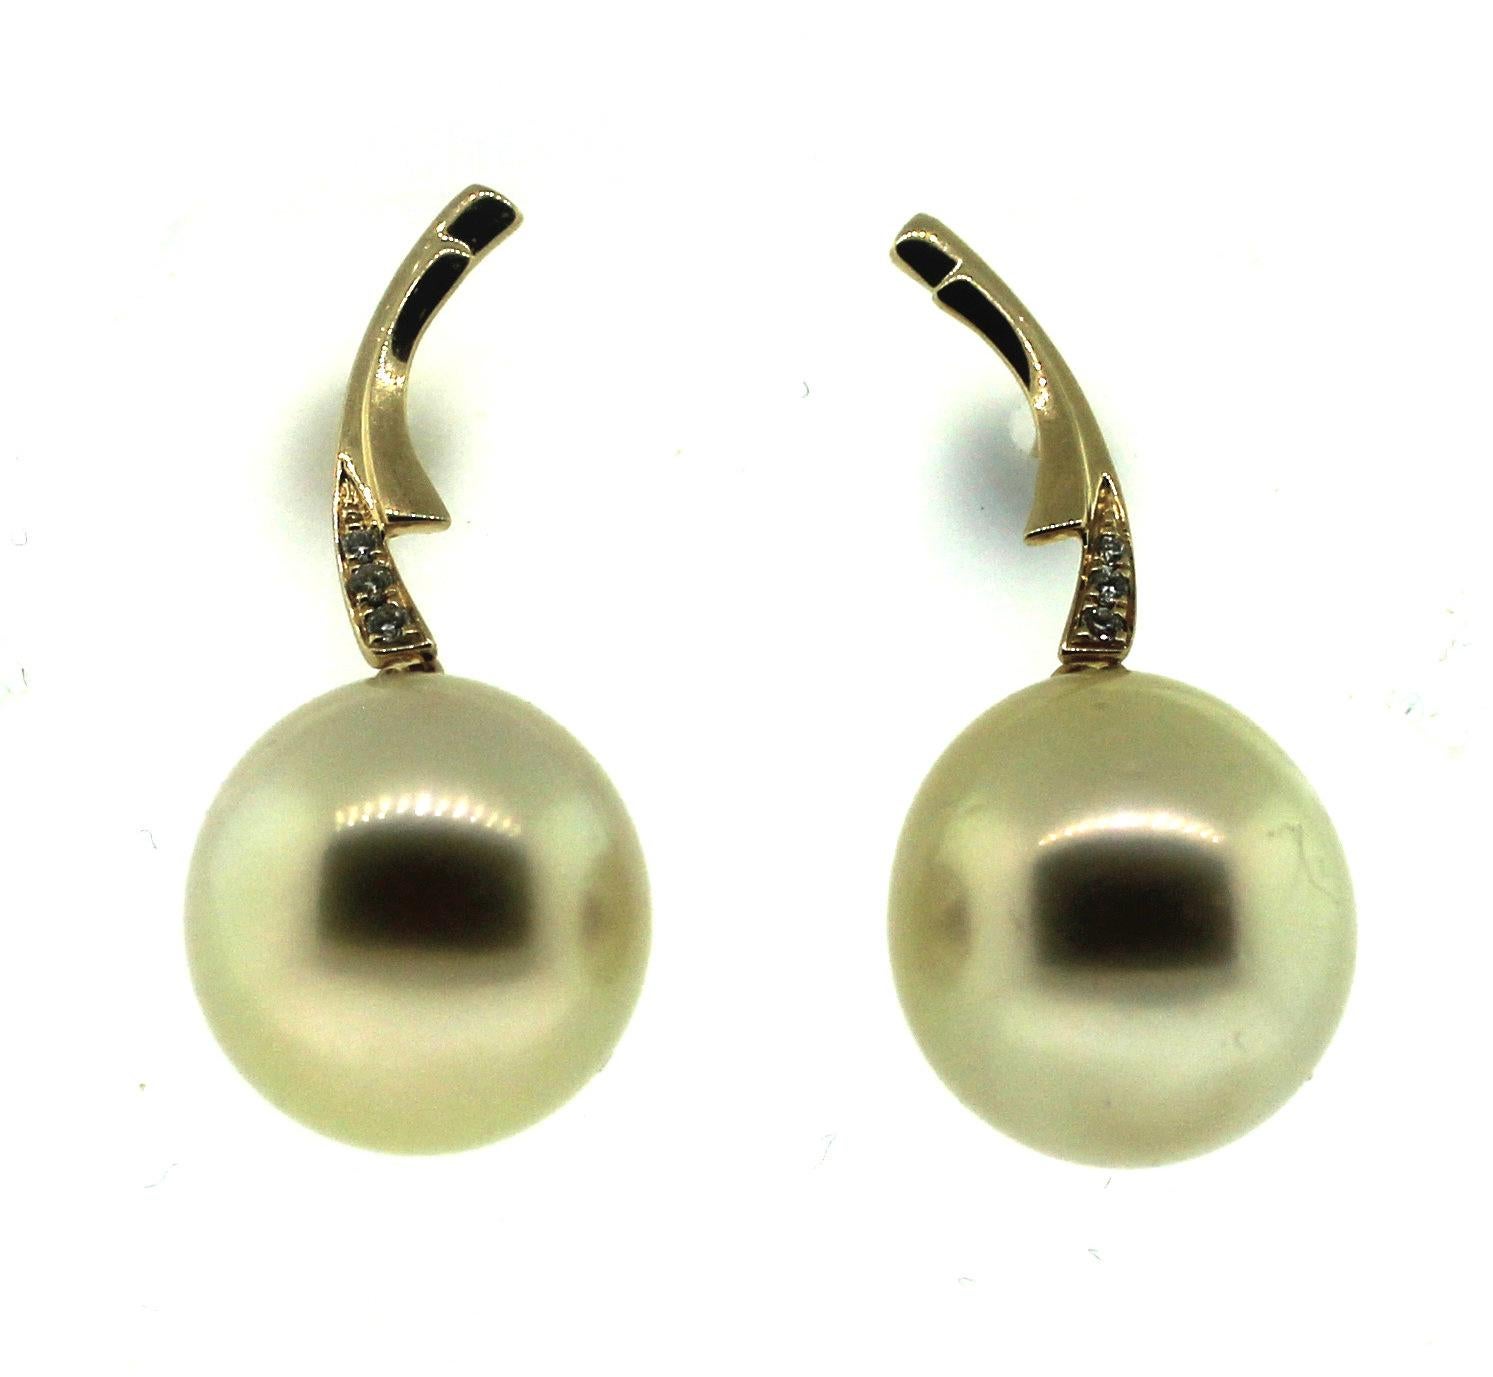 Hakimoto By Jewel Of Ocean
18K White Gold With Diamonds
Natural Color Drop Cultured Pearl Earrings.
Total item weight 6.7 grams
12.5x13.5 mm Natural color South Sea Drop Cultured Pearls
18K Yellow Gold High Polish
Orient: Very Good
Luster: Very